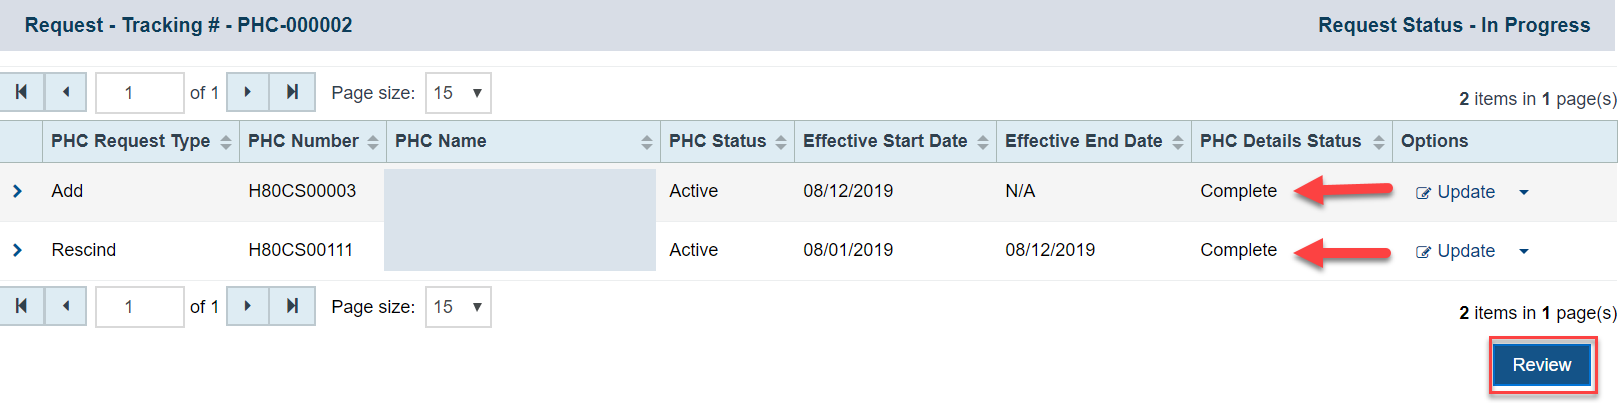 Screeshot of Request - Tracking Number page showing details complete